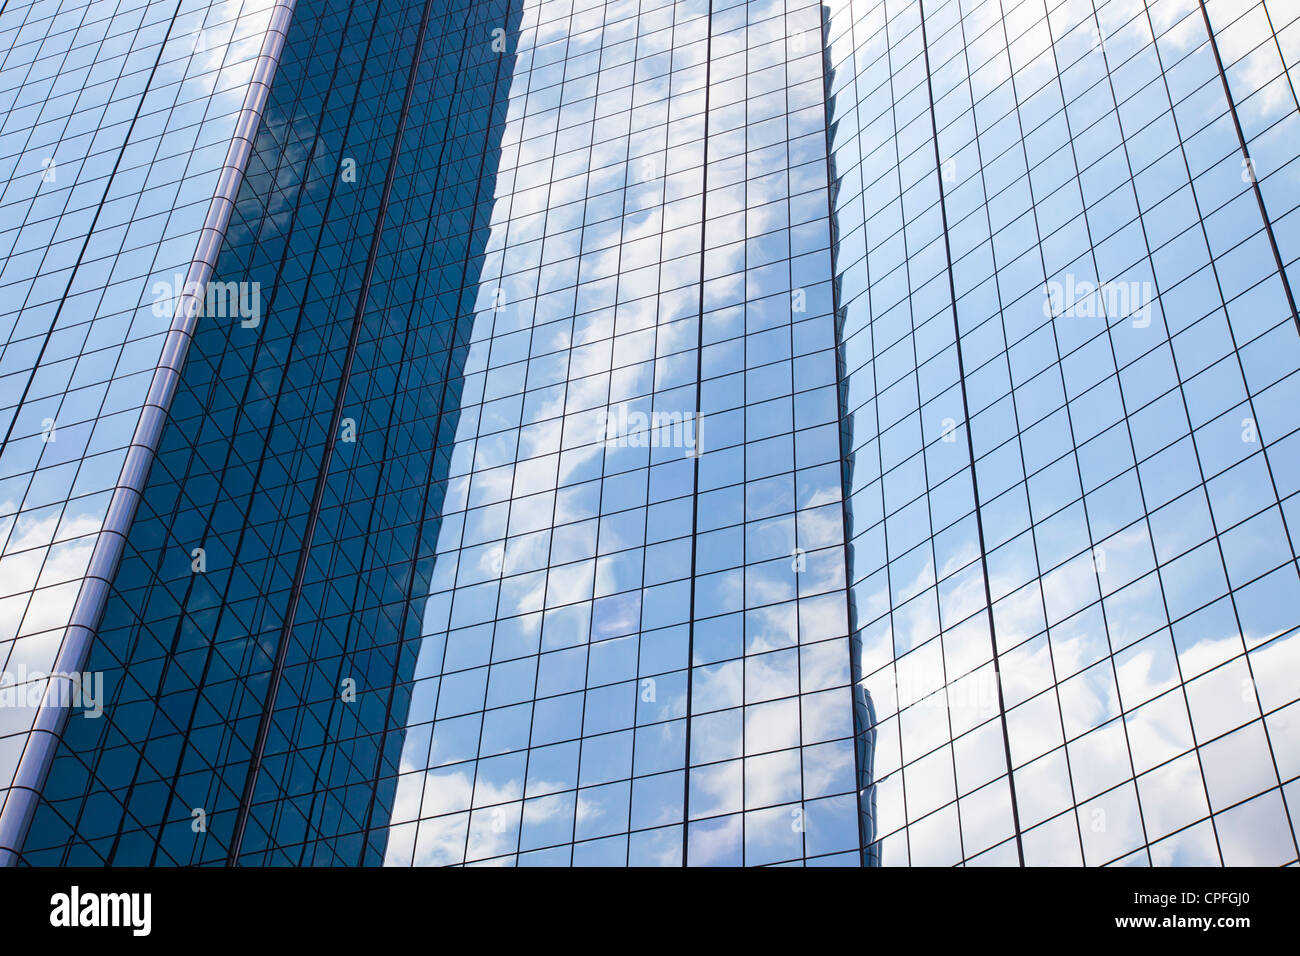 Clouds and sky reflected on the glass windows of the Hyatt Regency. Dallas, Texas. Stock Photo